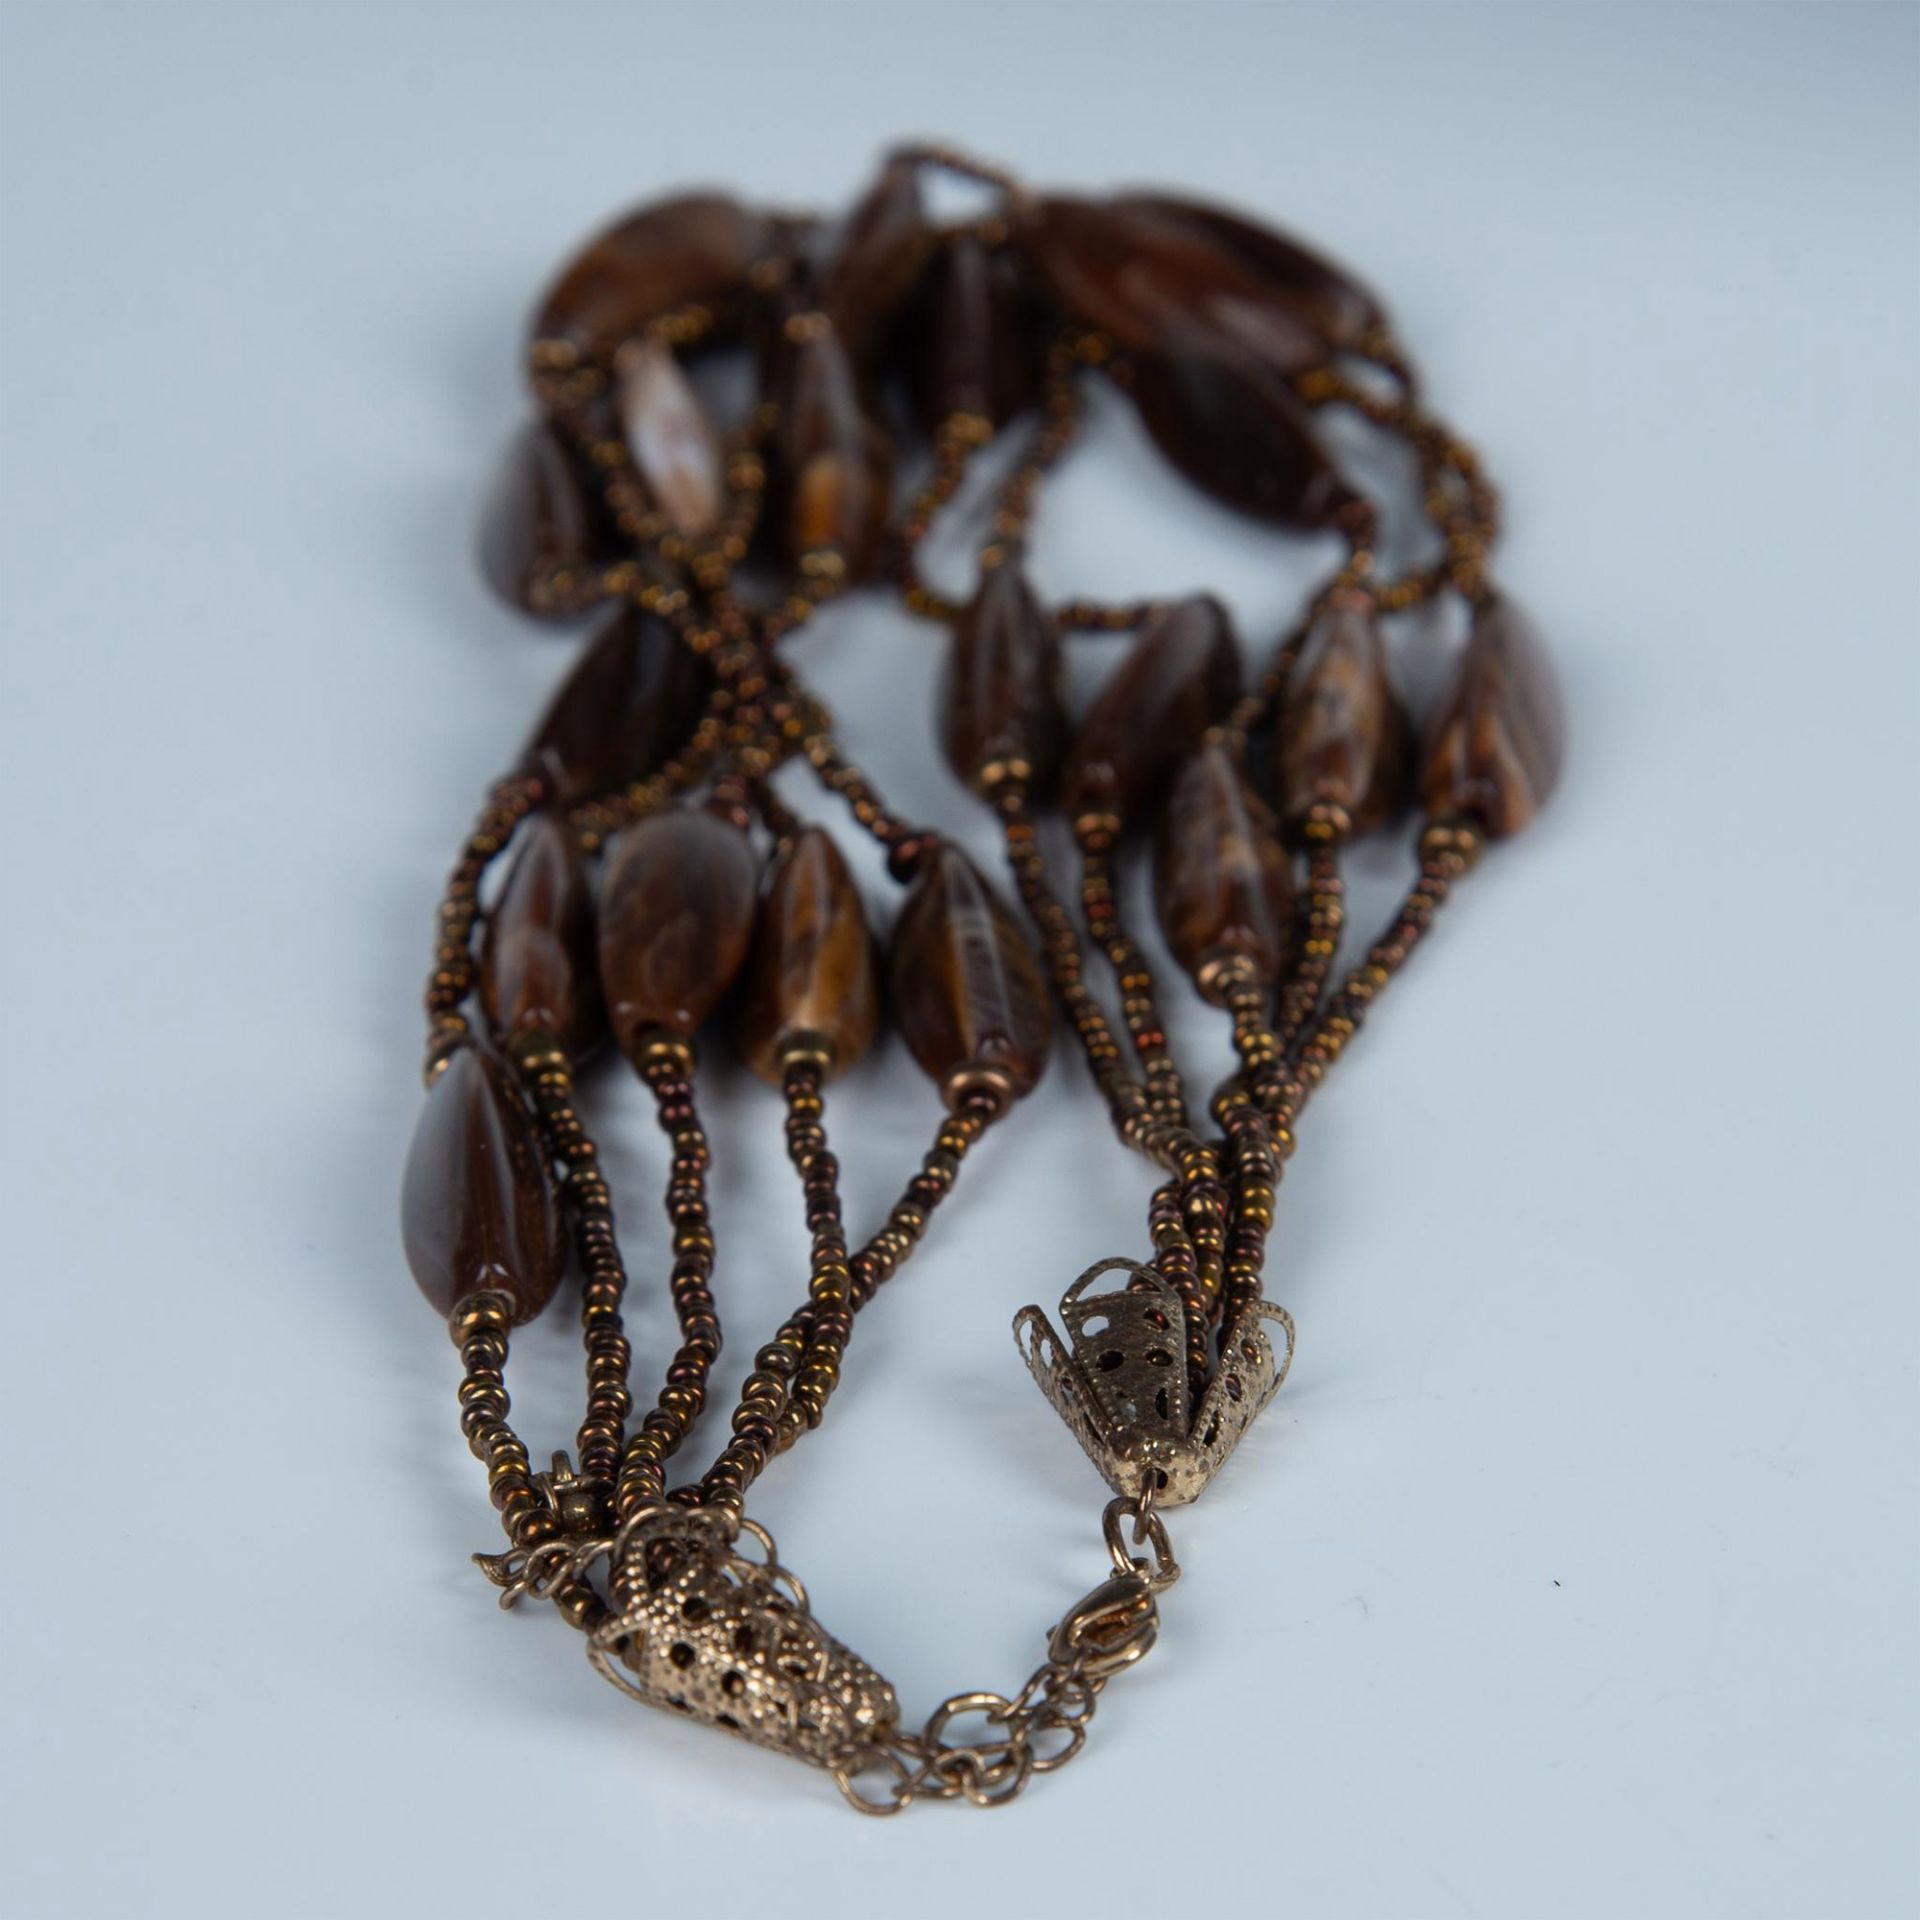 Gorgeous Five-Strand Brown & Bronze Tone Beaded Necklace - Image 3 of 3